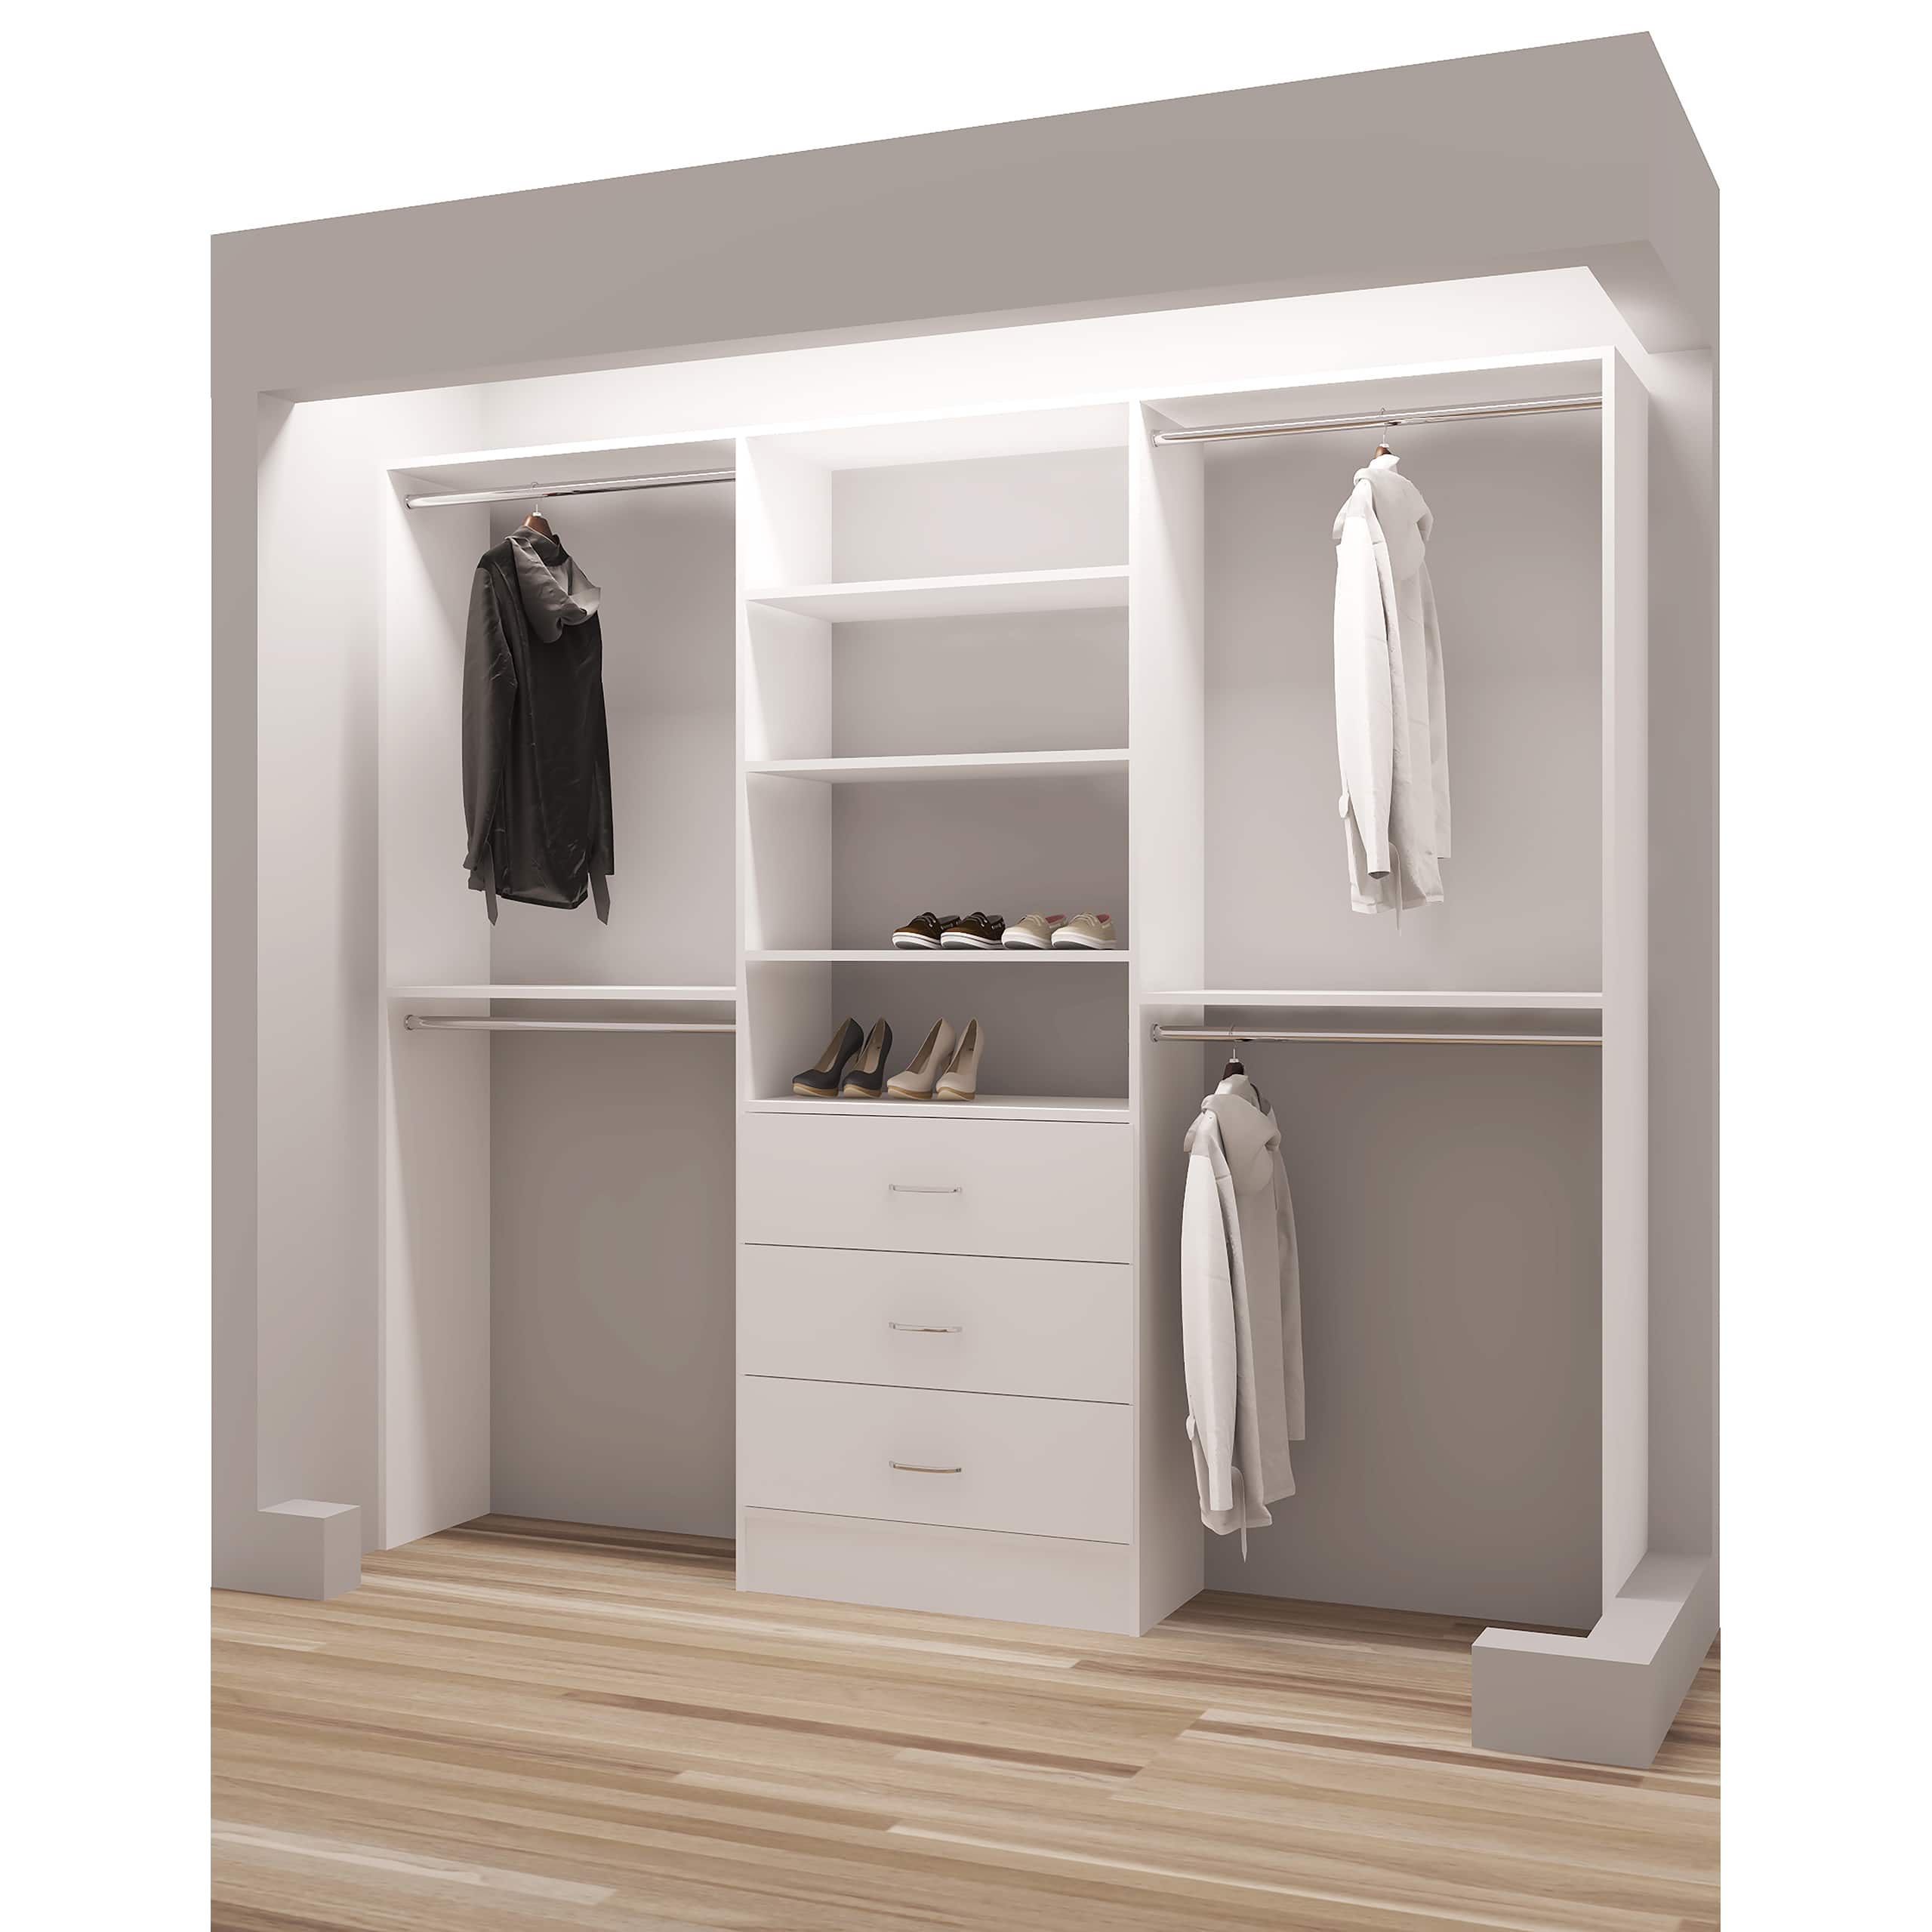 Buy Closet Organizers & Systems Online at Overstock.com | Our Best